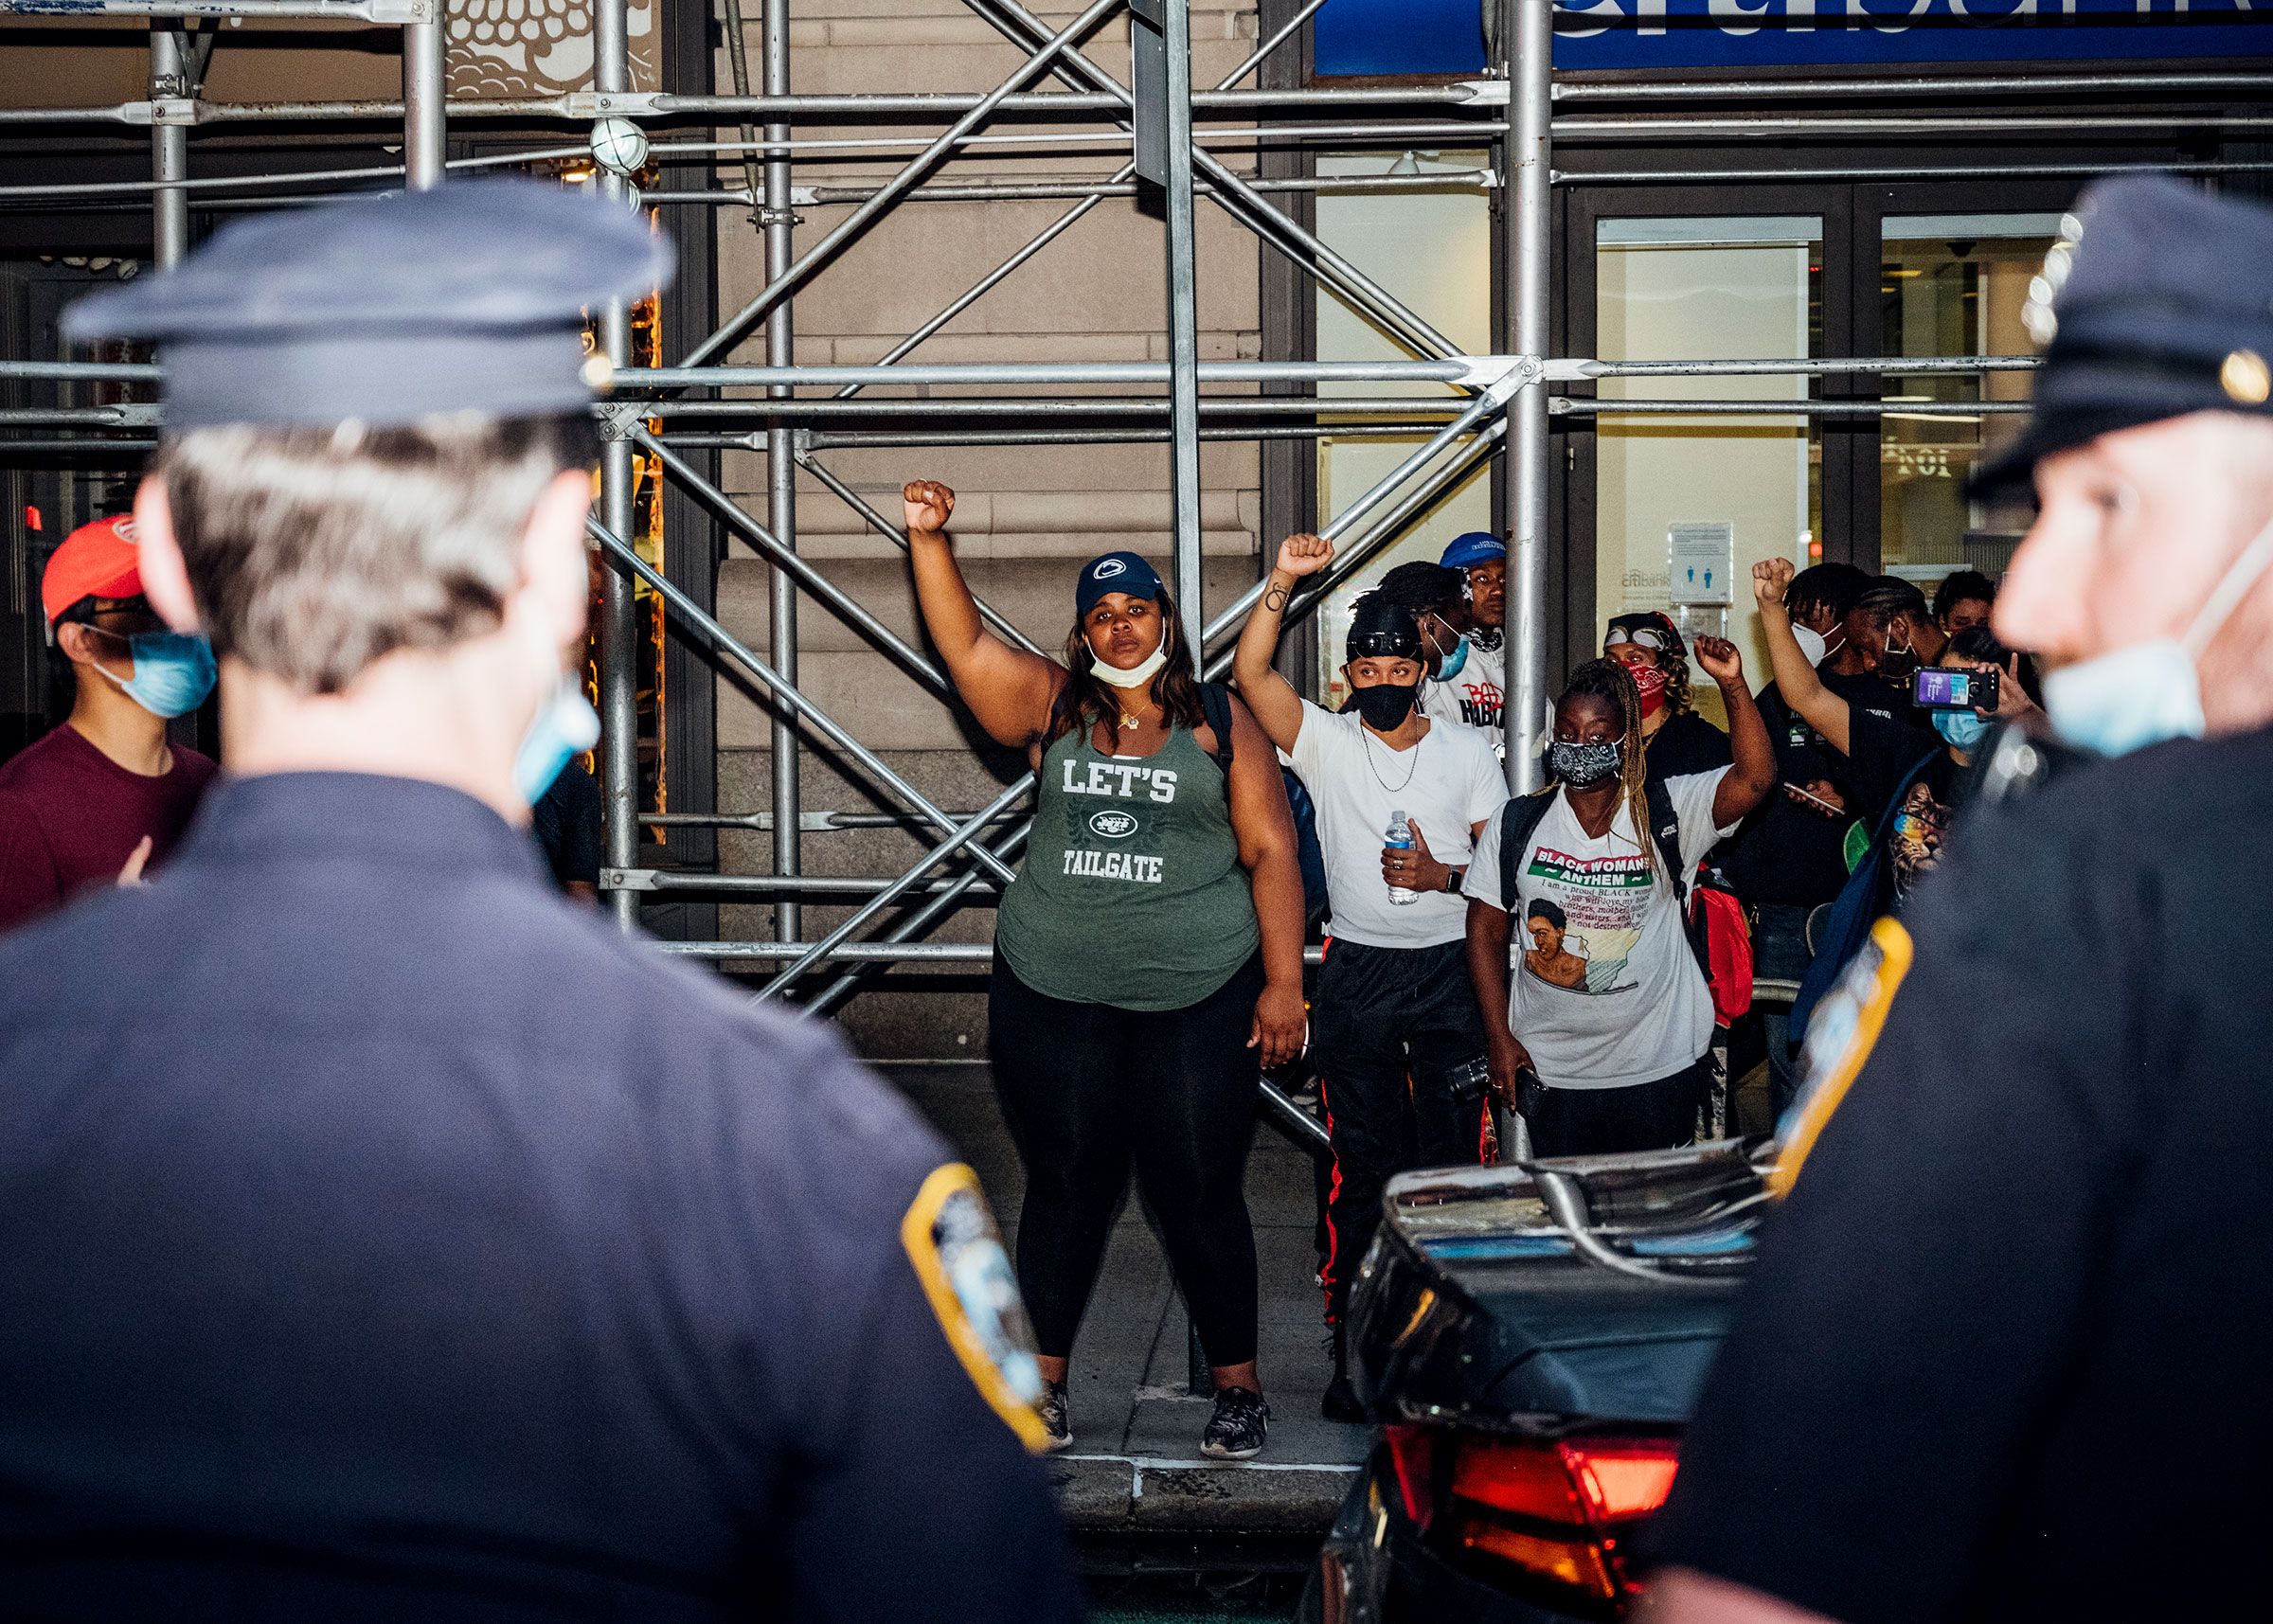 In the wake of George Floyd's death, protesters face off with police officers during another night of demonstrations in Manhattan on May 30, 2020. (Malike Sidibe for TIME)